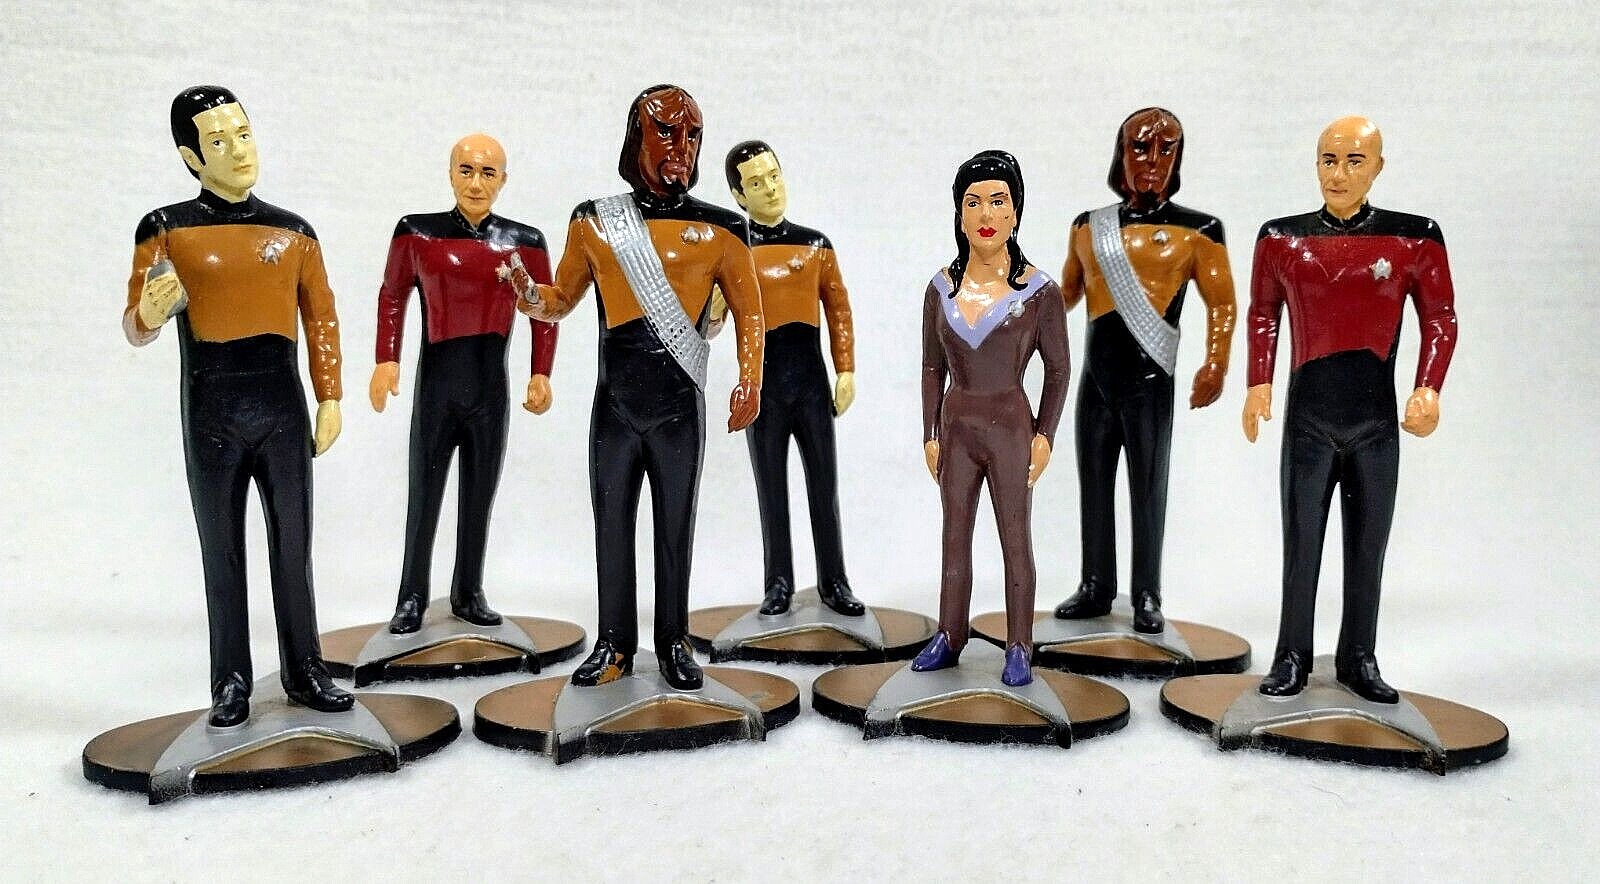 1992 Paramount Pictures Hamilton Gifts Star Trek Generations Figure Lot Of 7